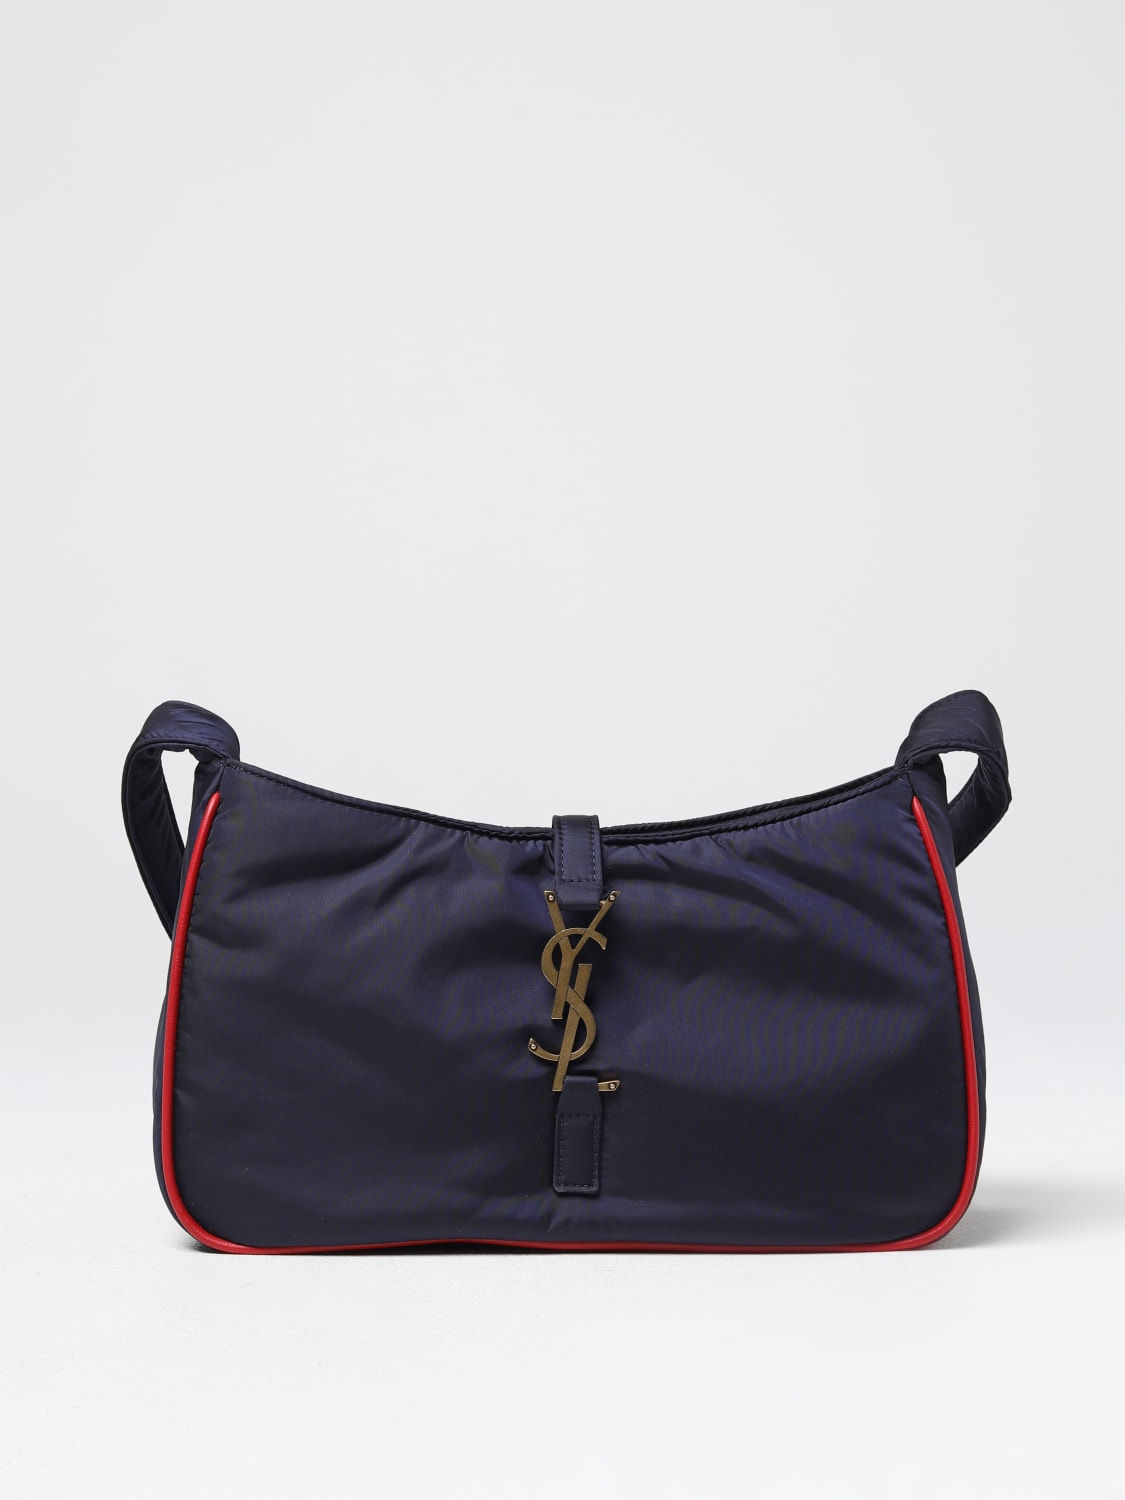 Yves Saint Laurent Bags Outlet Online - YSL USA Outlet